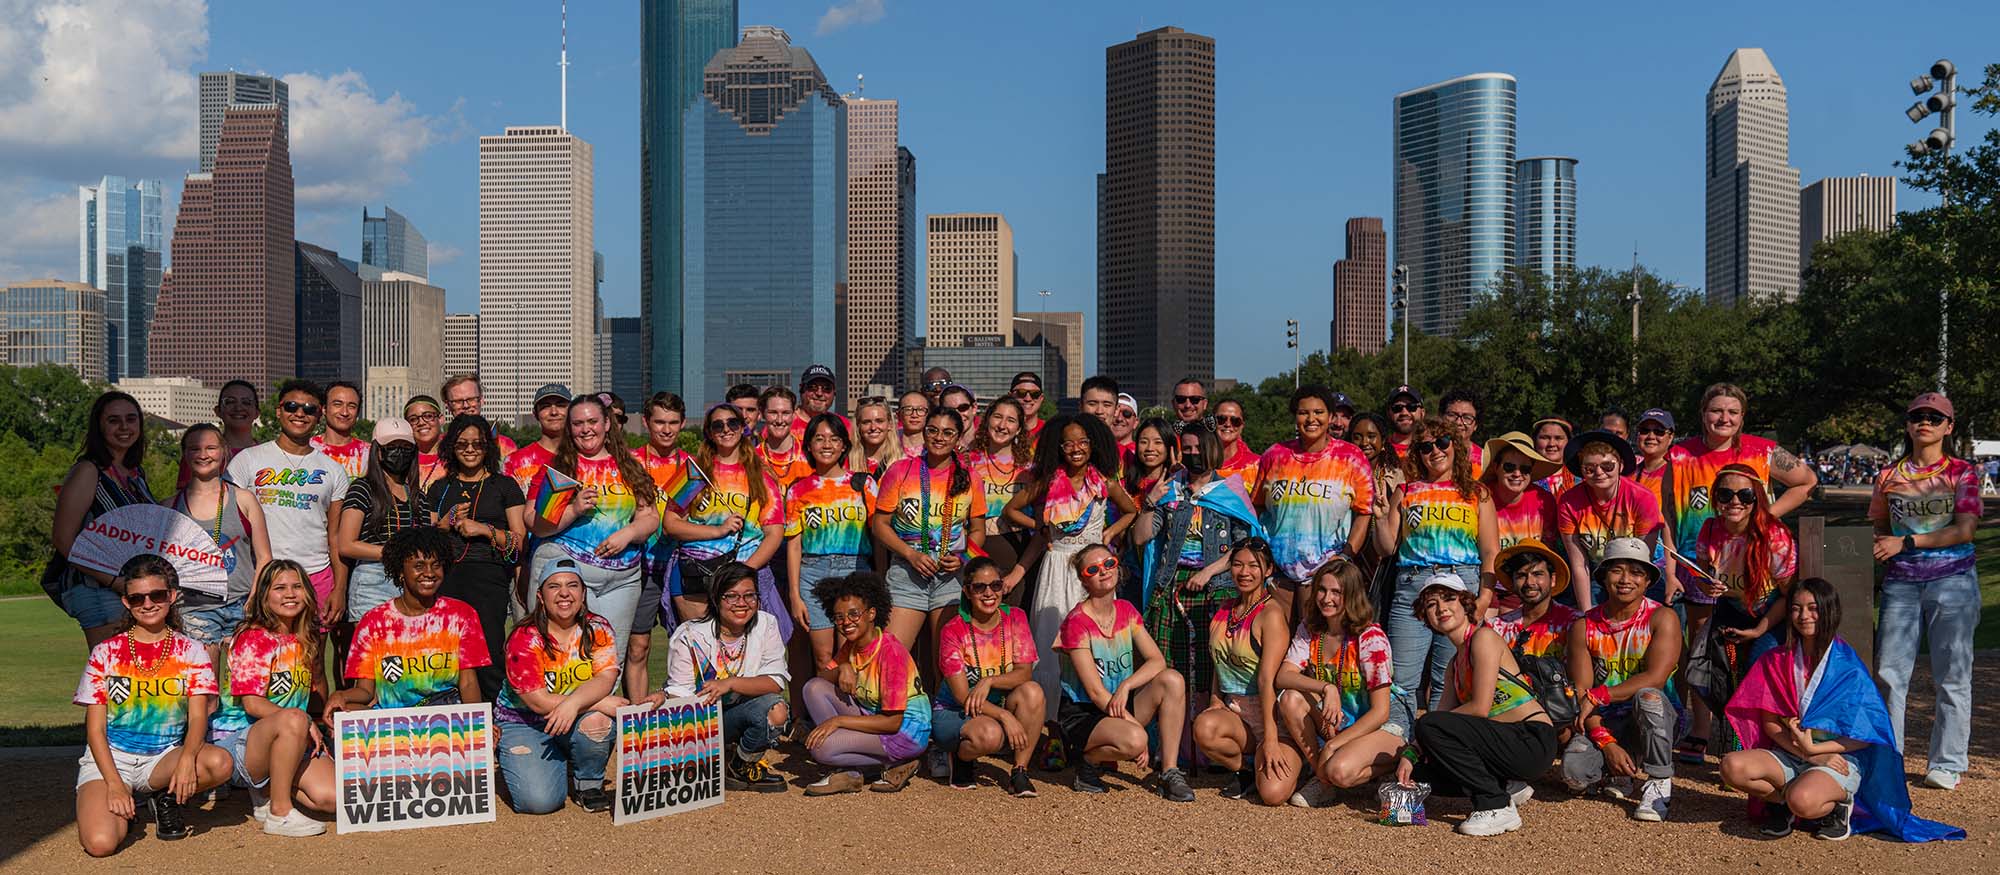 The entire group of parade participants from the Rice community poses for a picture in front of the Houston skyline.